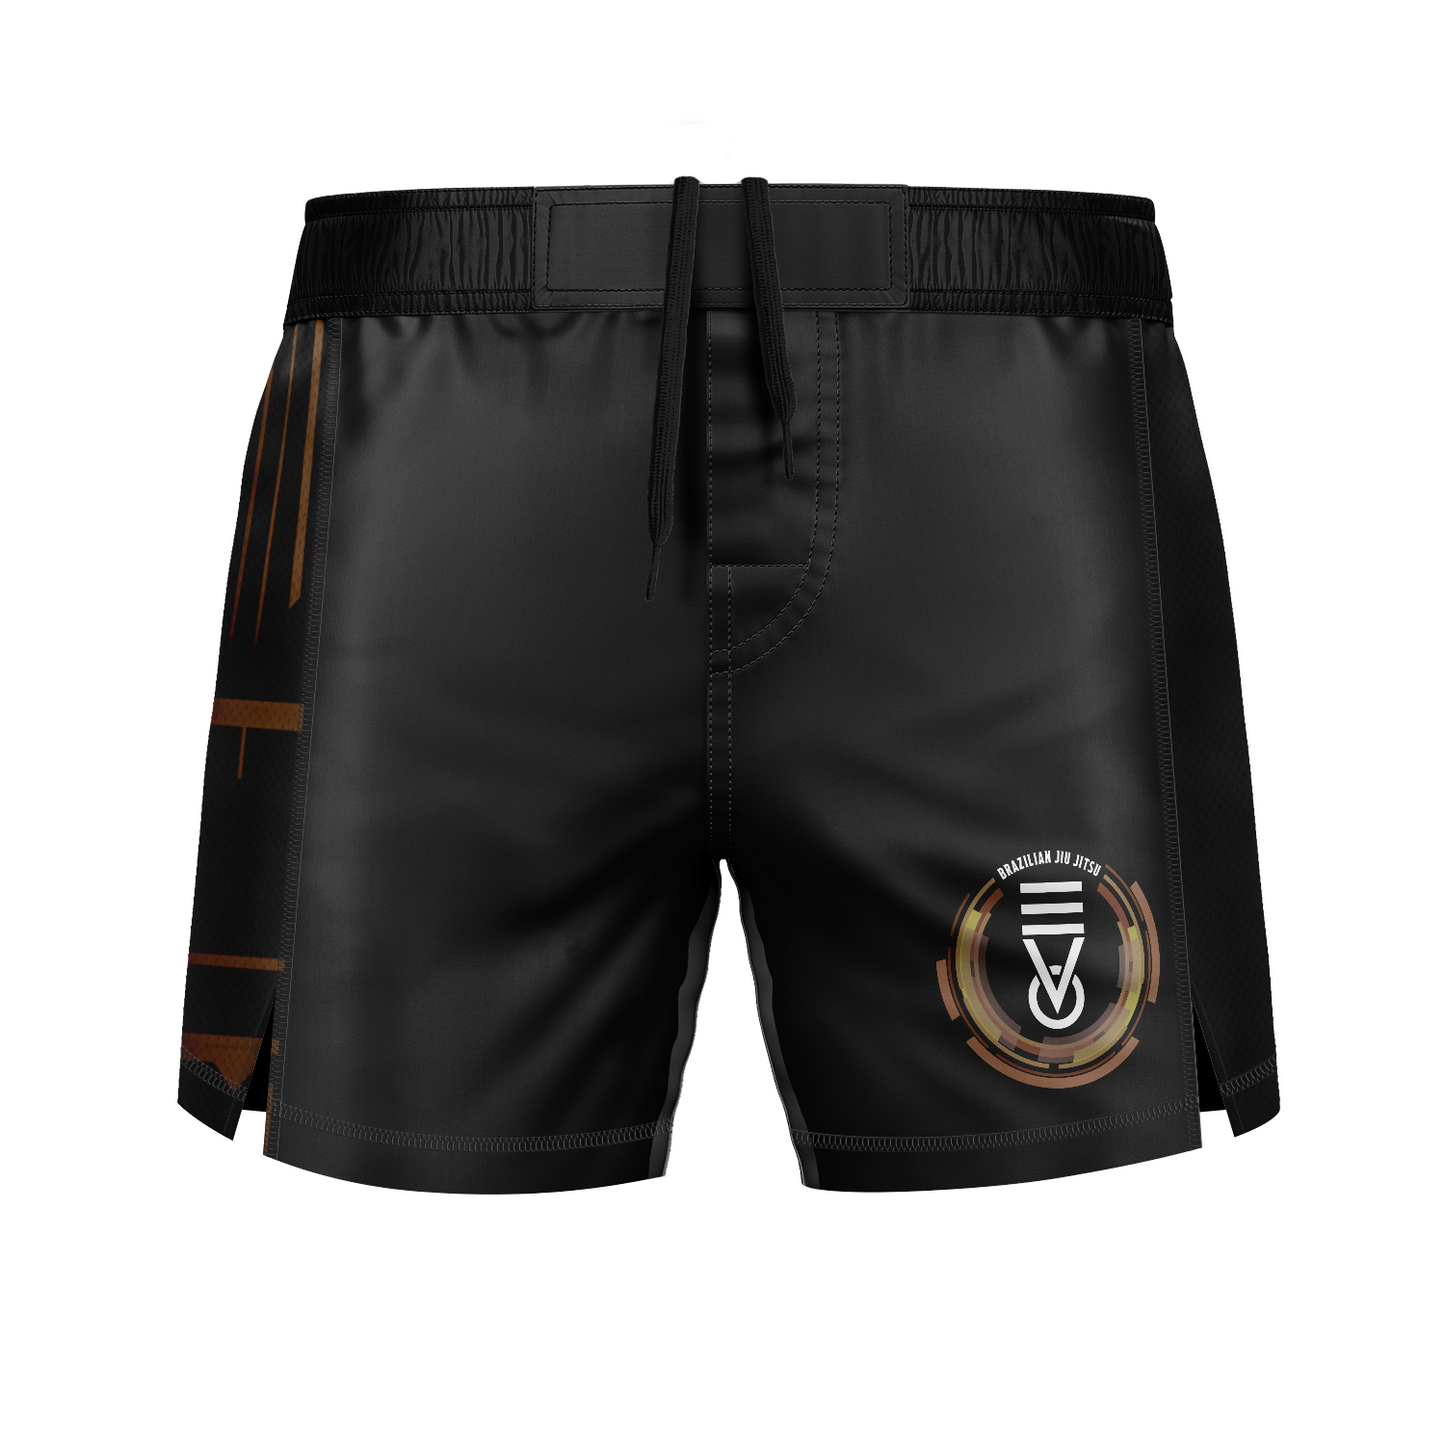 Evo BJJ fight shorts Ranked, black and brown